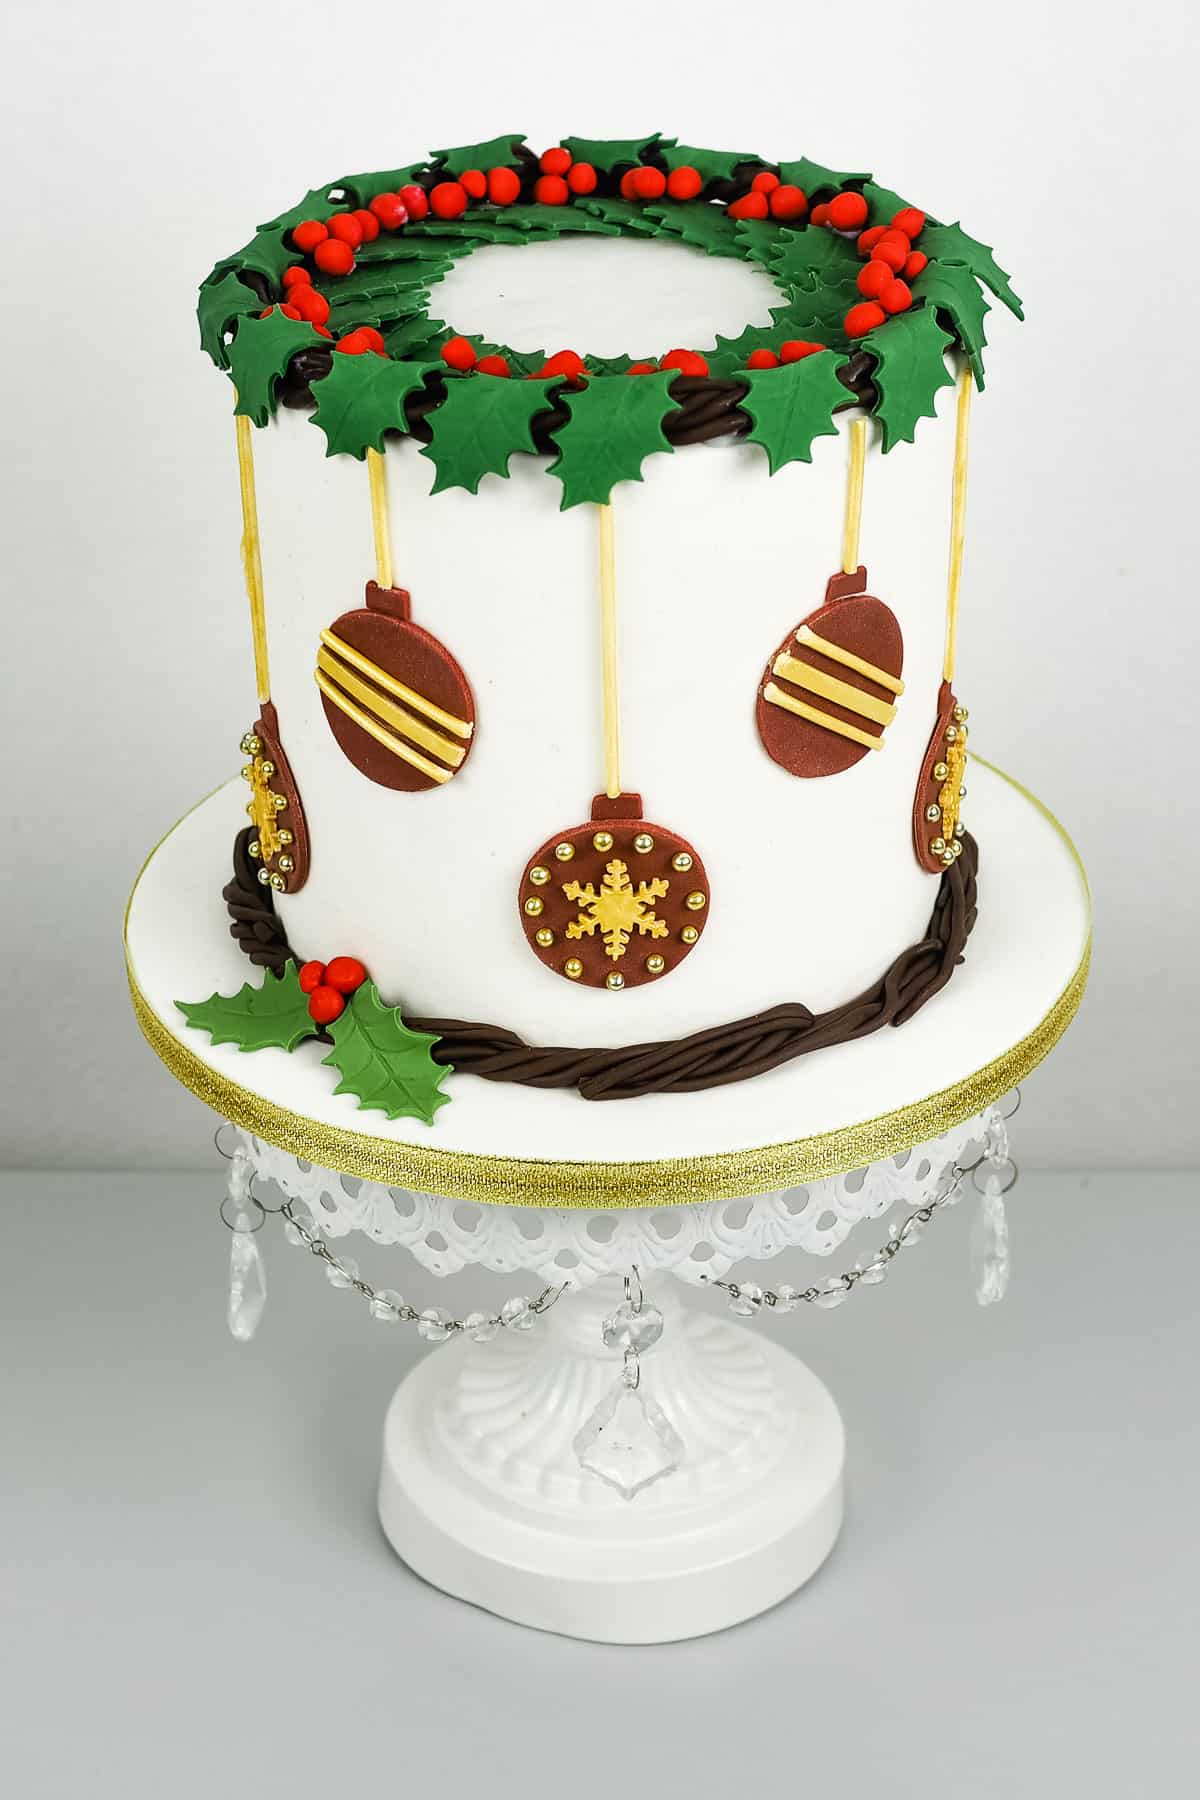 A round cake with holly leaves and baubles decoration on a white cake stand.